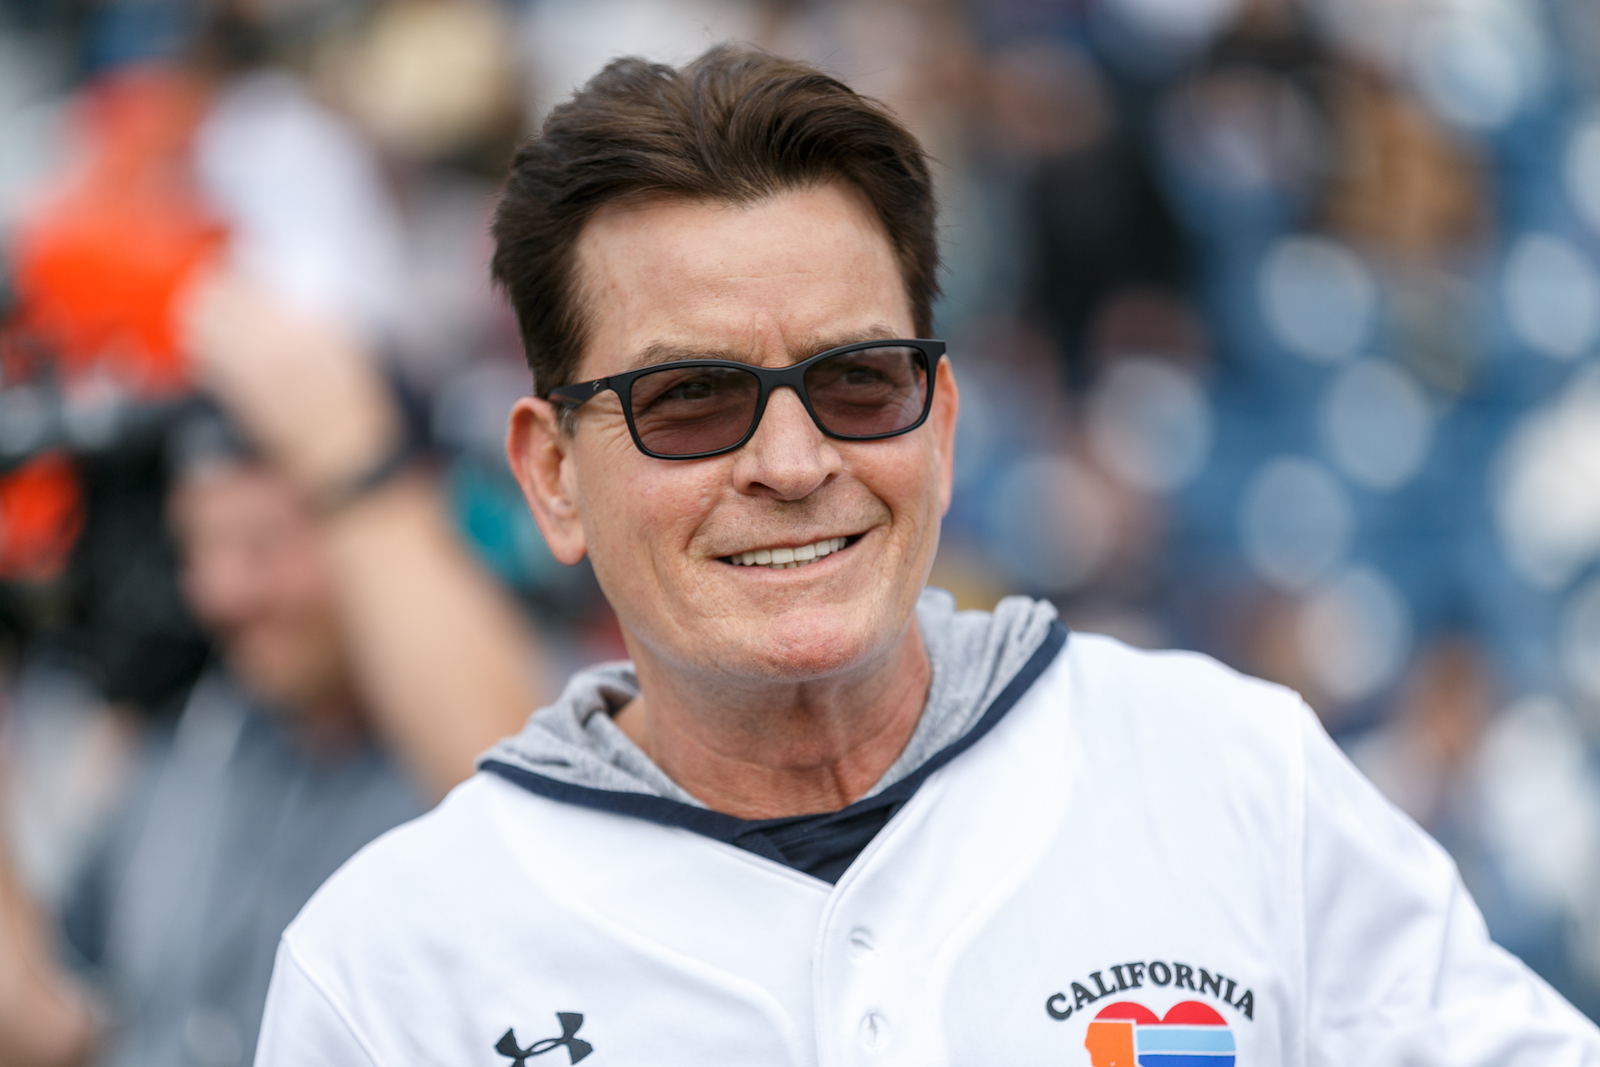 Charlie Sheen attended a charity baseball game in 2019